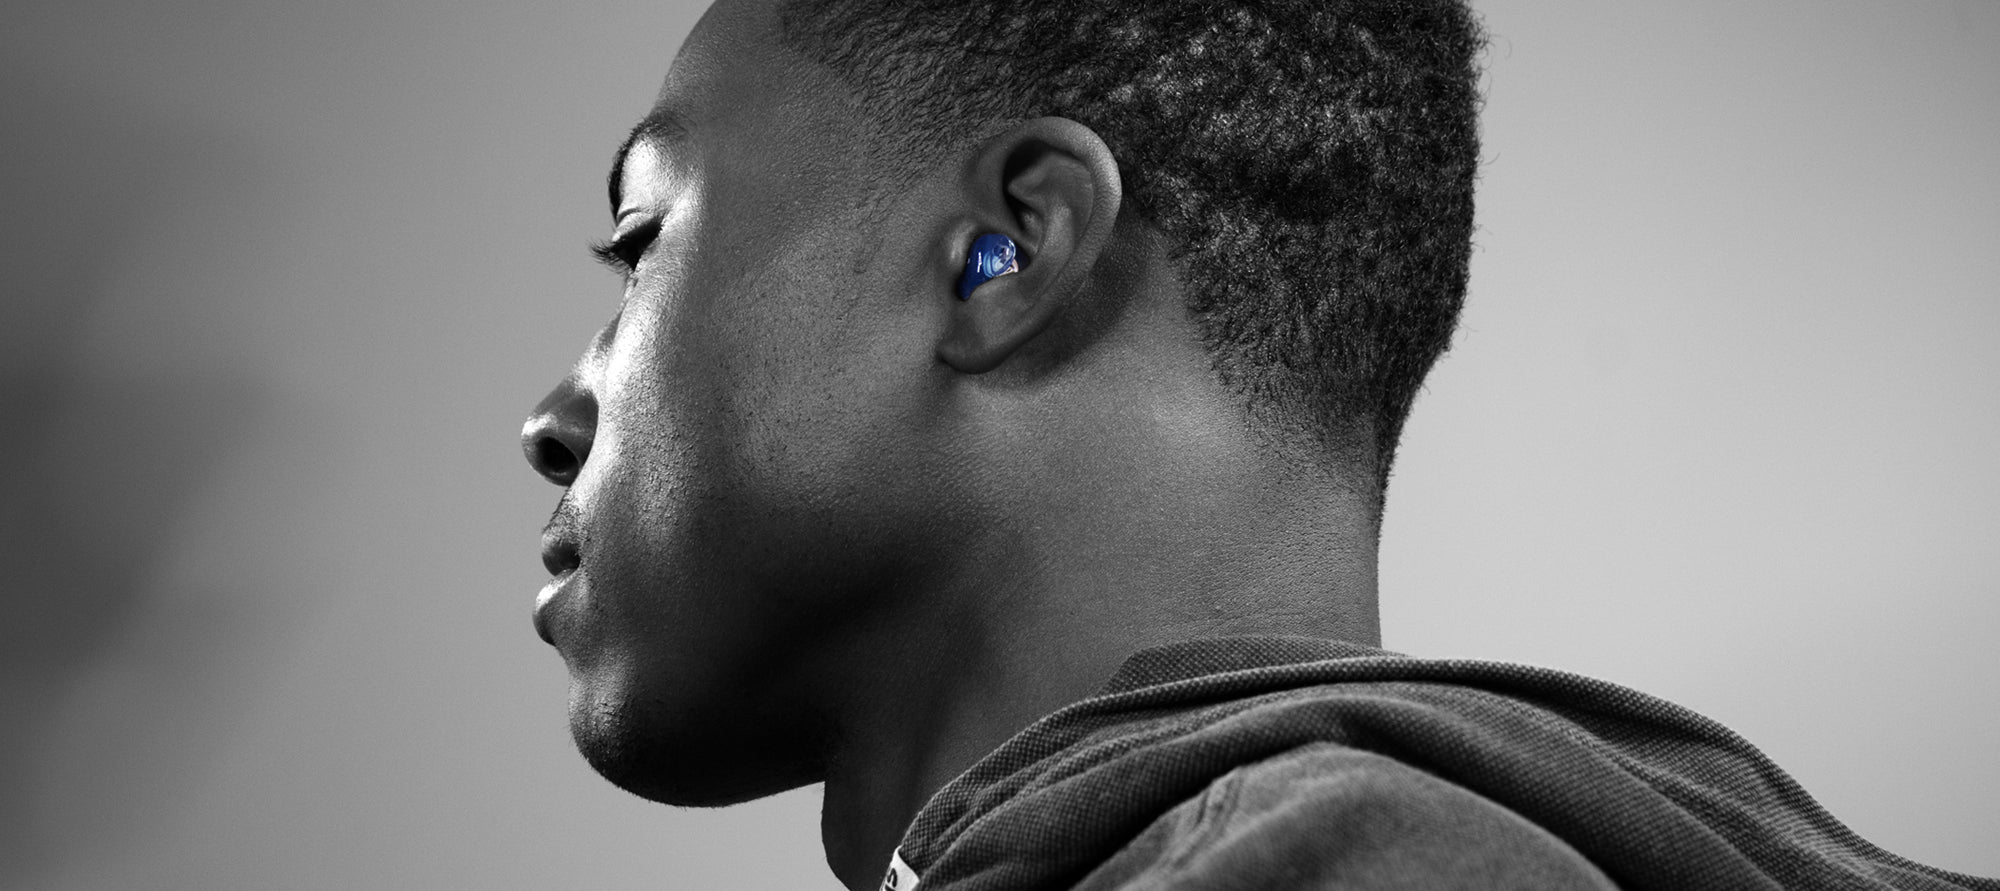 Profile of a young man wearing wireless earbuds, shot in black and white, focusing on his ear and the side of his face.